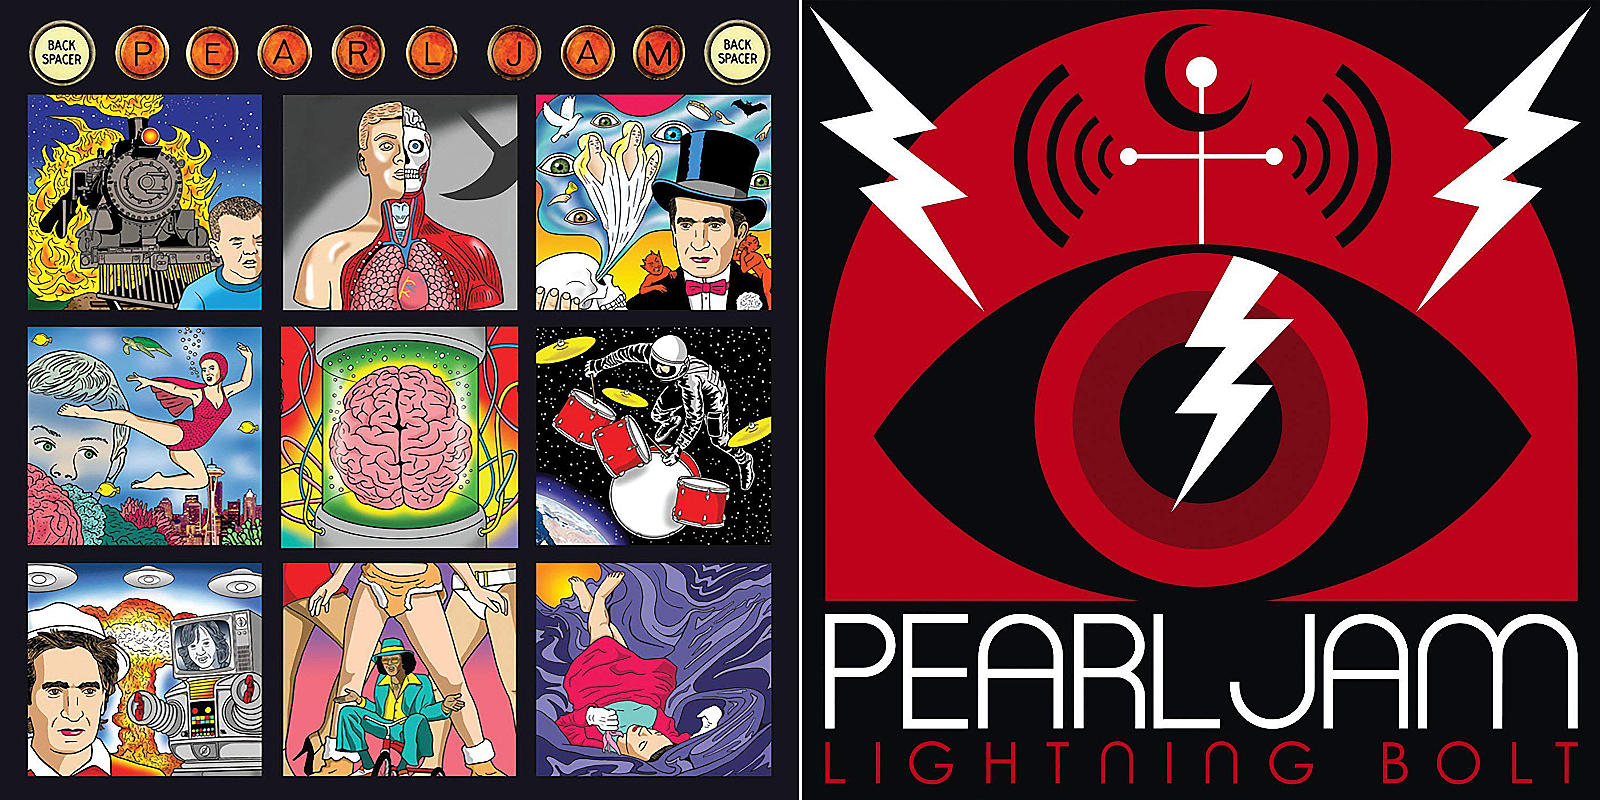 Are Pearl Jam Teasing a New Album?